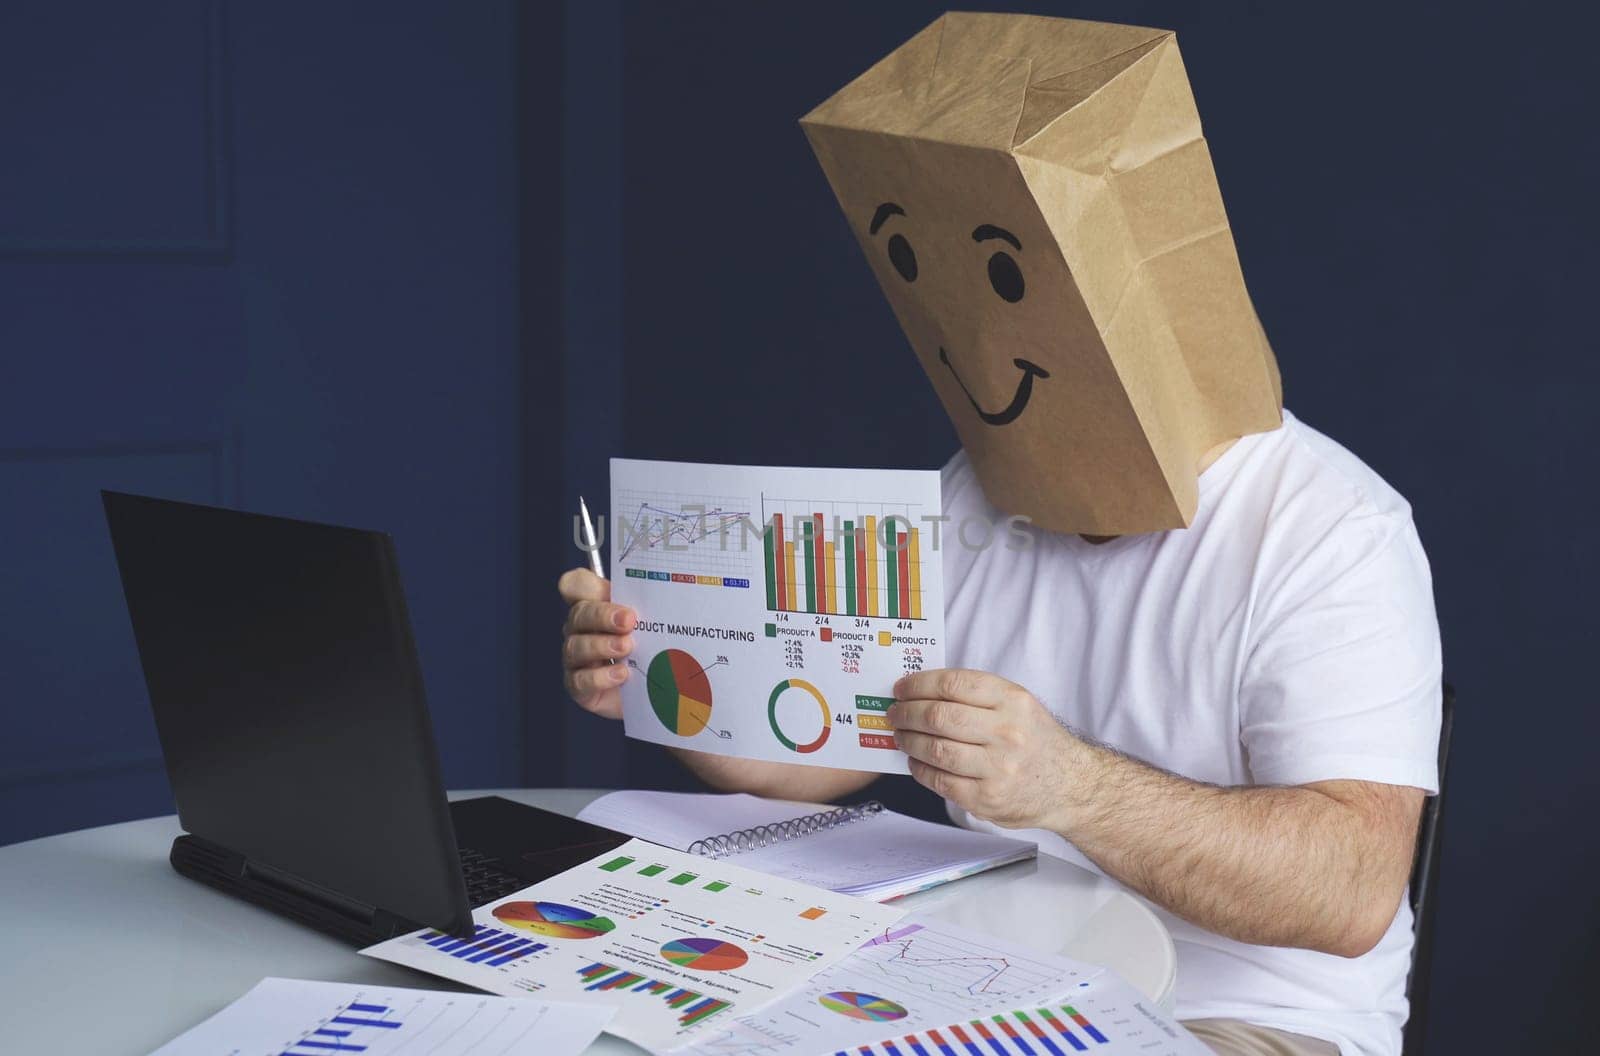 A man is a businessman in a white shirt with a paper bag on his head, with a joyful smiley face drawn, conducts a video conference or training via video link on a laptop. Emotions and gestures.